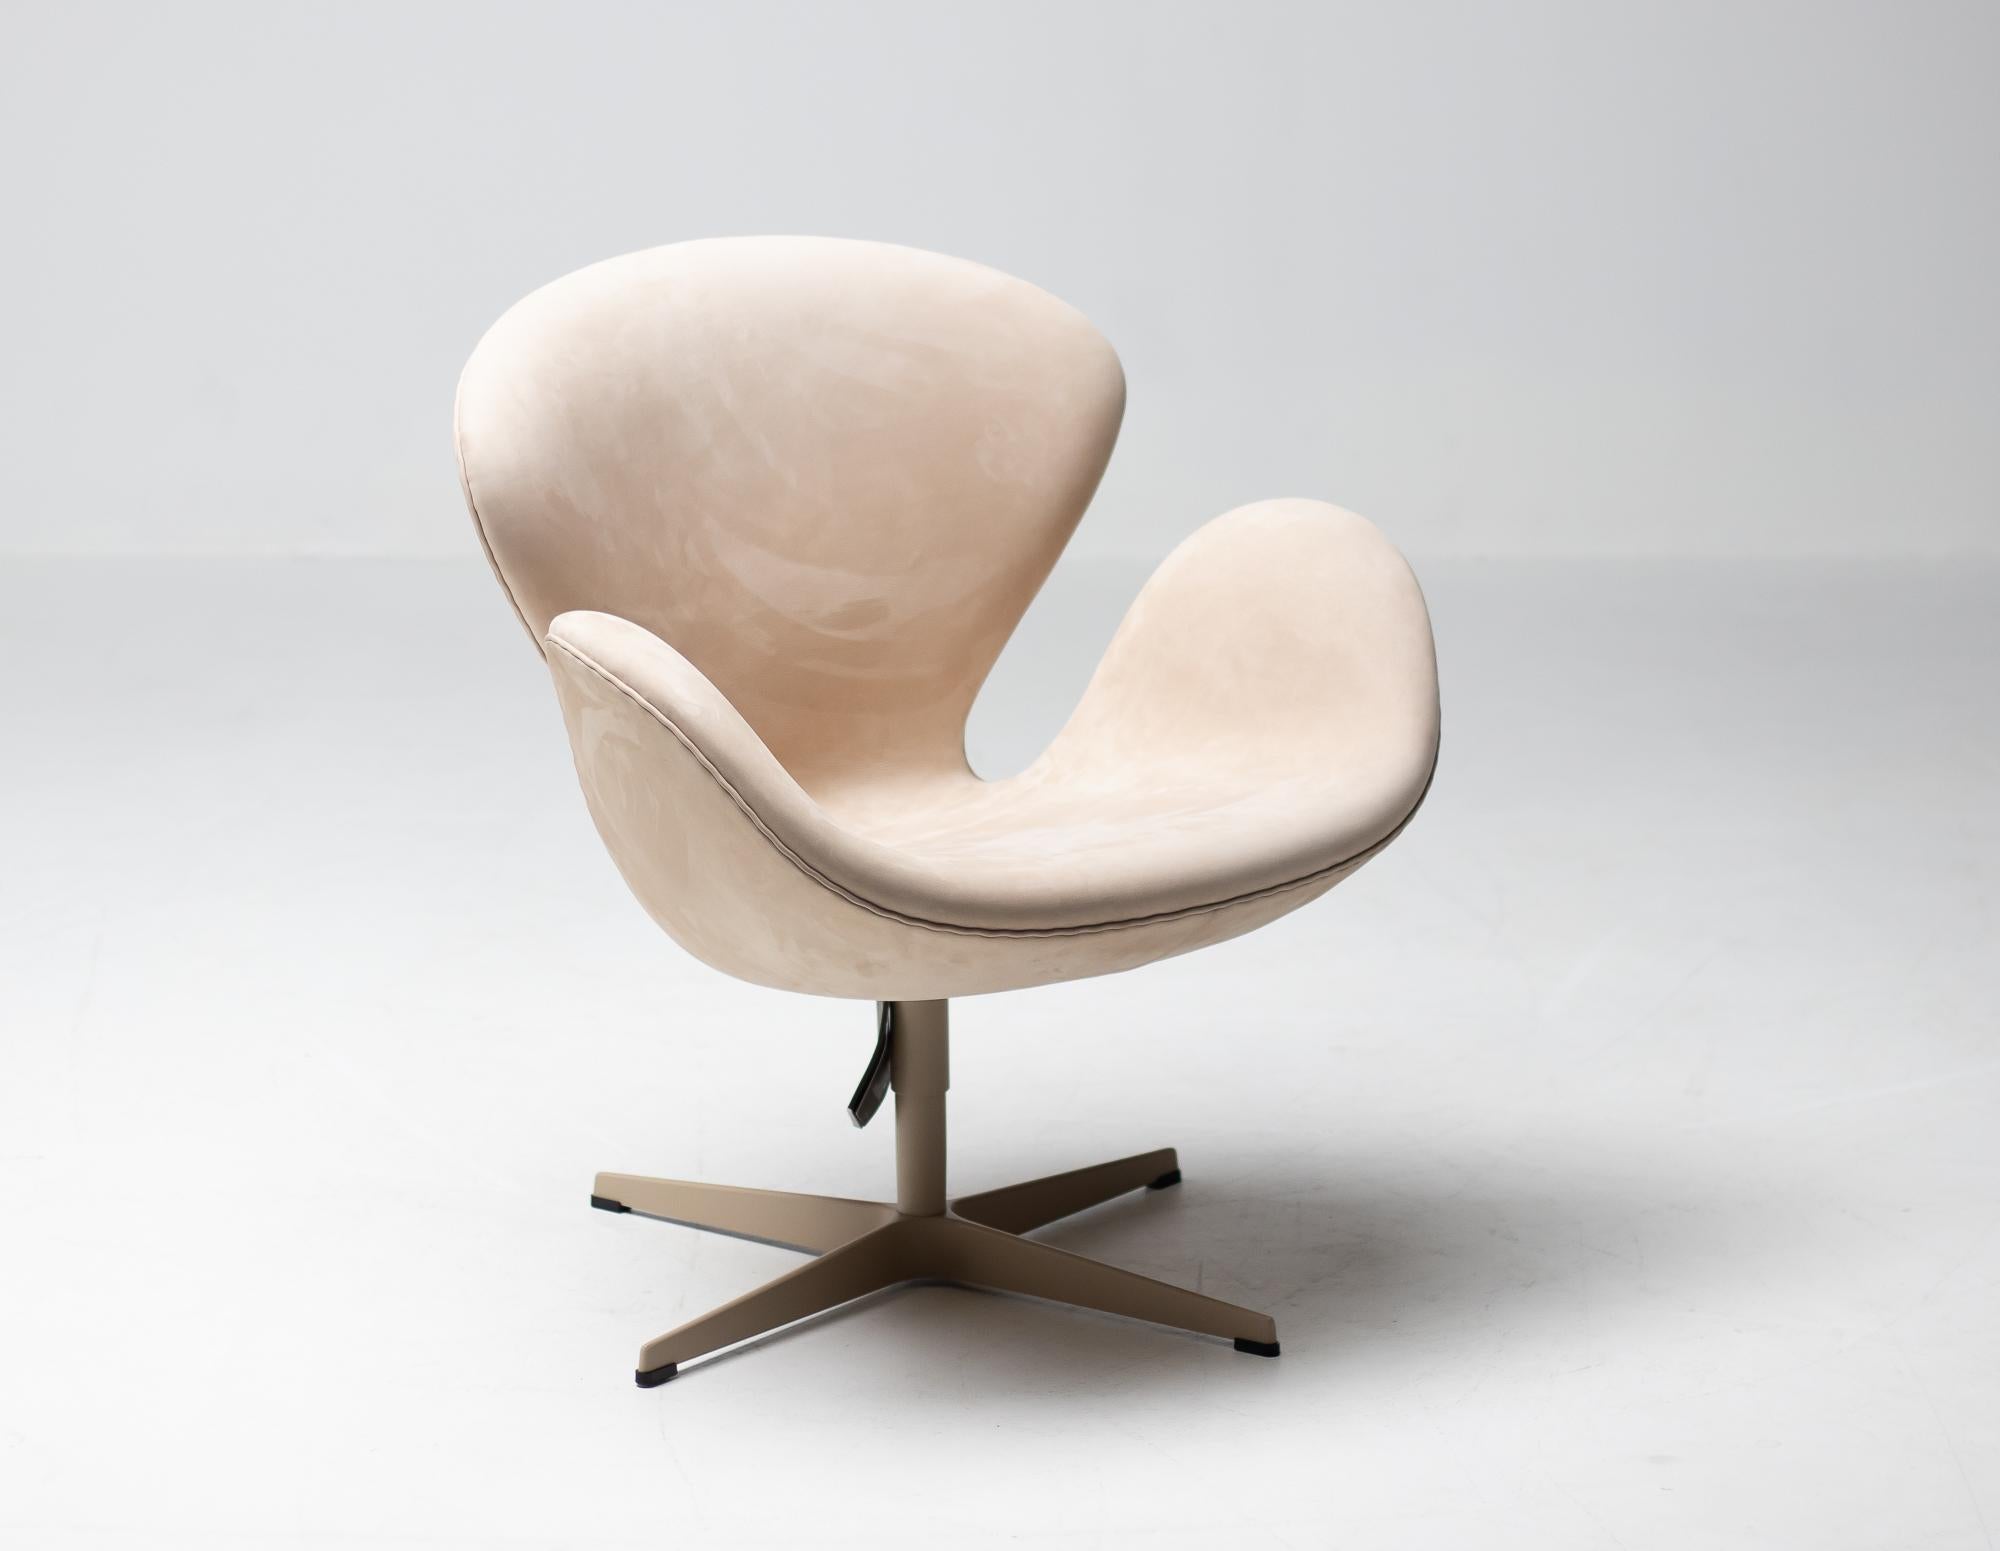 A 2015 limited edition of the Swan chair with a production of only 300 chairs worldwide. 
This limited version added a new dimension to the chair with an exclusive, vivid and warm expression.
In new unused condition, marked and numbered with label